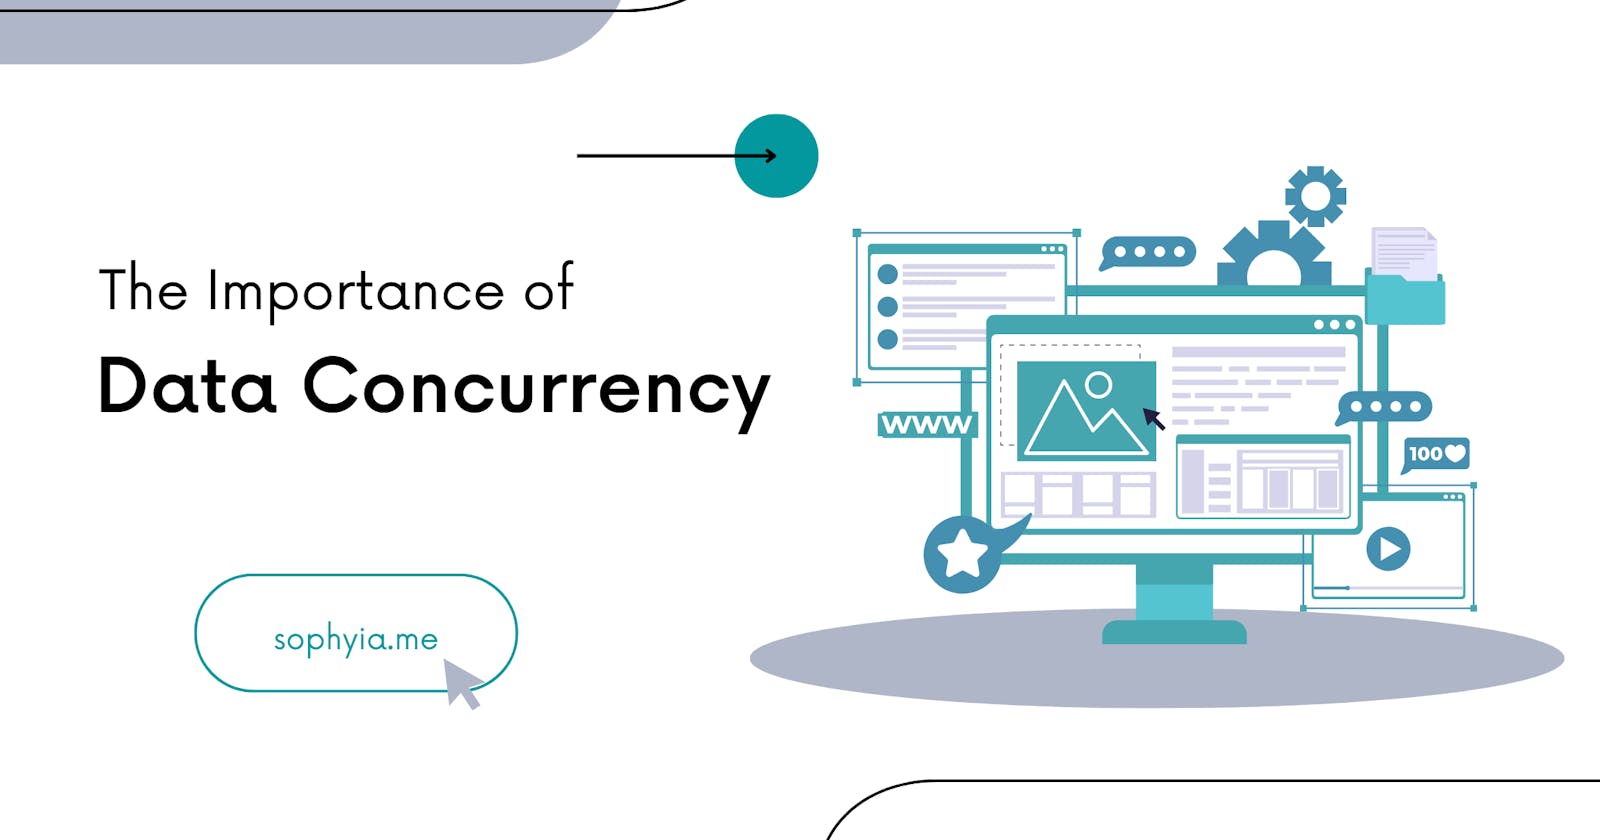 The Importance of Data Concurrency